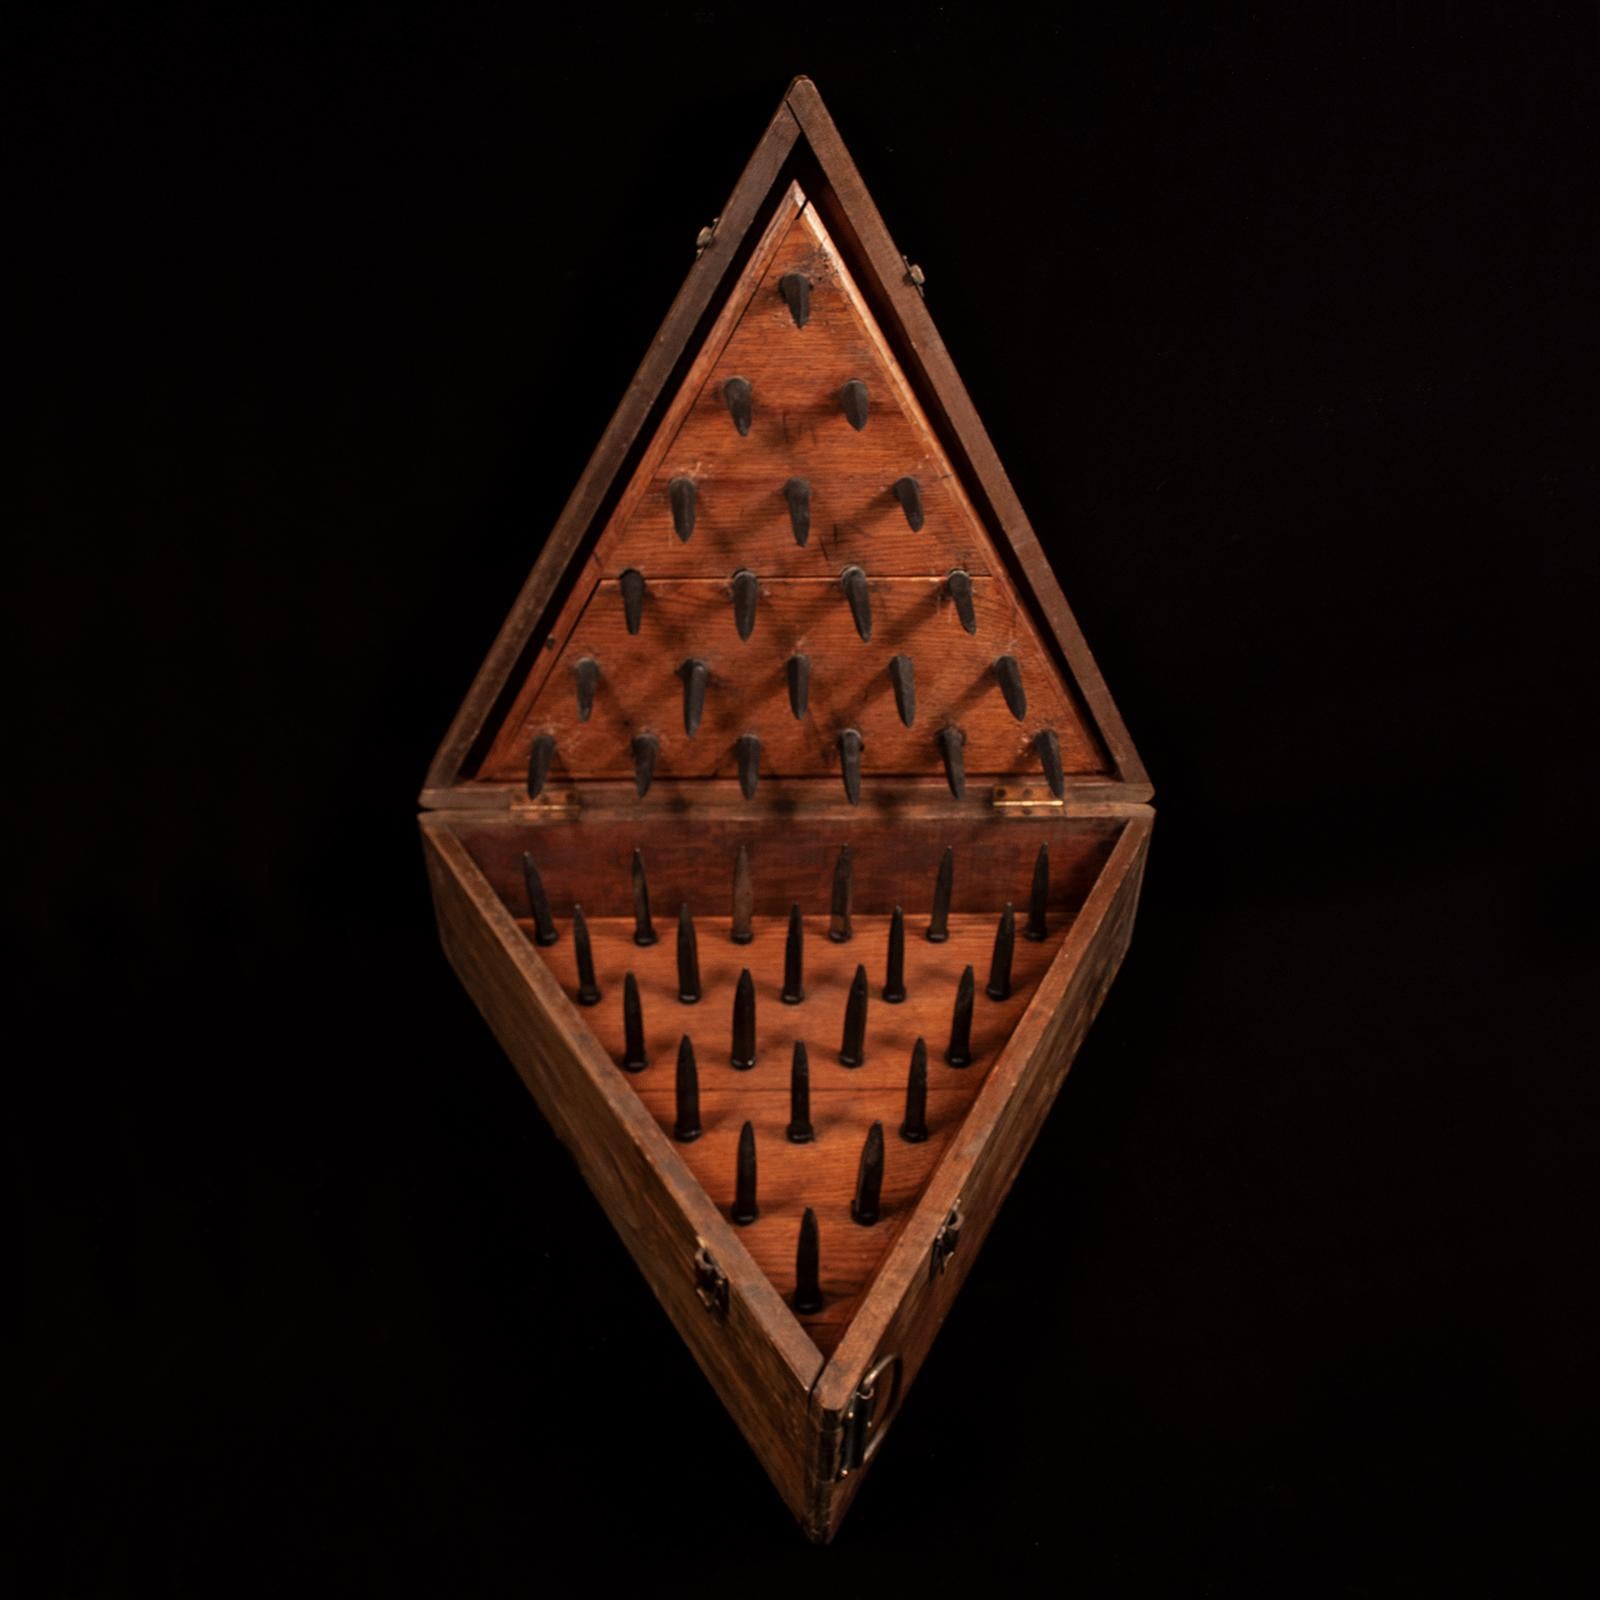 A triangular wooden case contains two separate wooden triangles, one studded with iron spikes and the other with rubber facsimiles. Apparently, during the initiation of new members, candidates were blindfolded after being shown a triangular chair